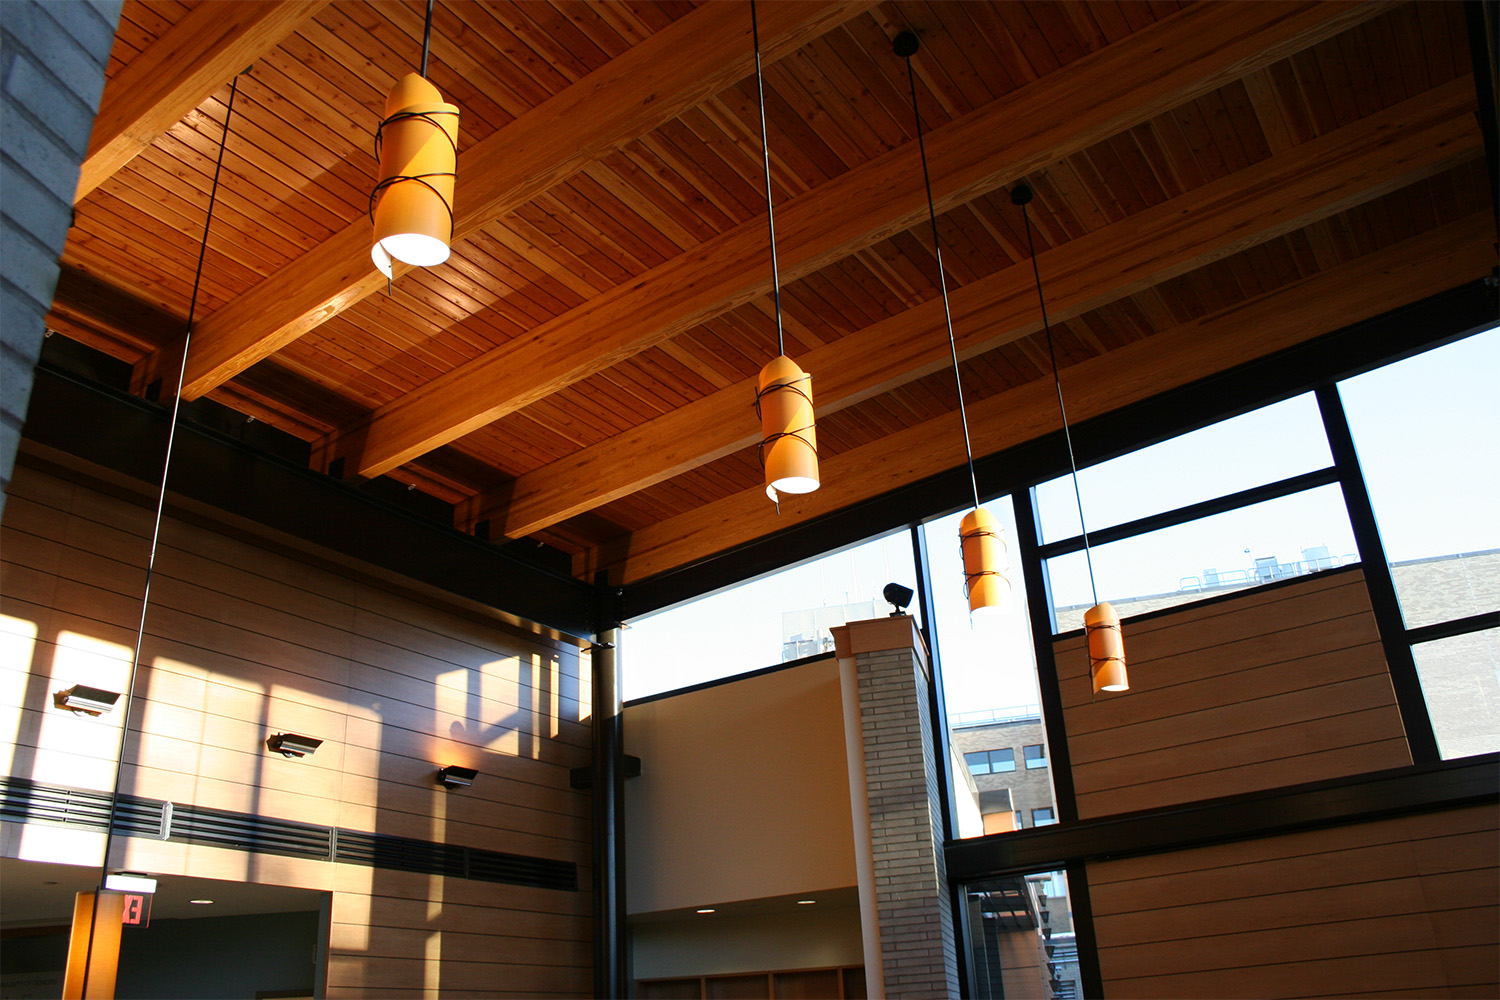 view of wooden ceiling at Marlborough Hospital, with hanging light fixtures 